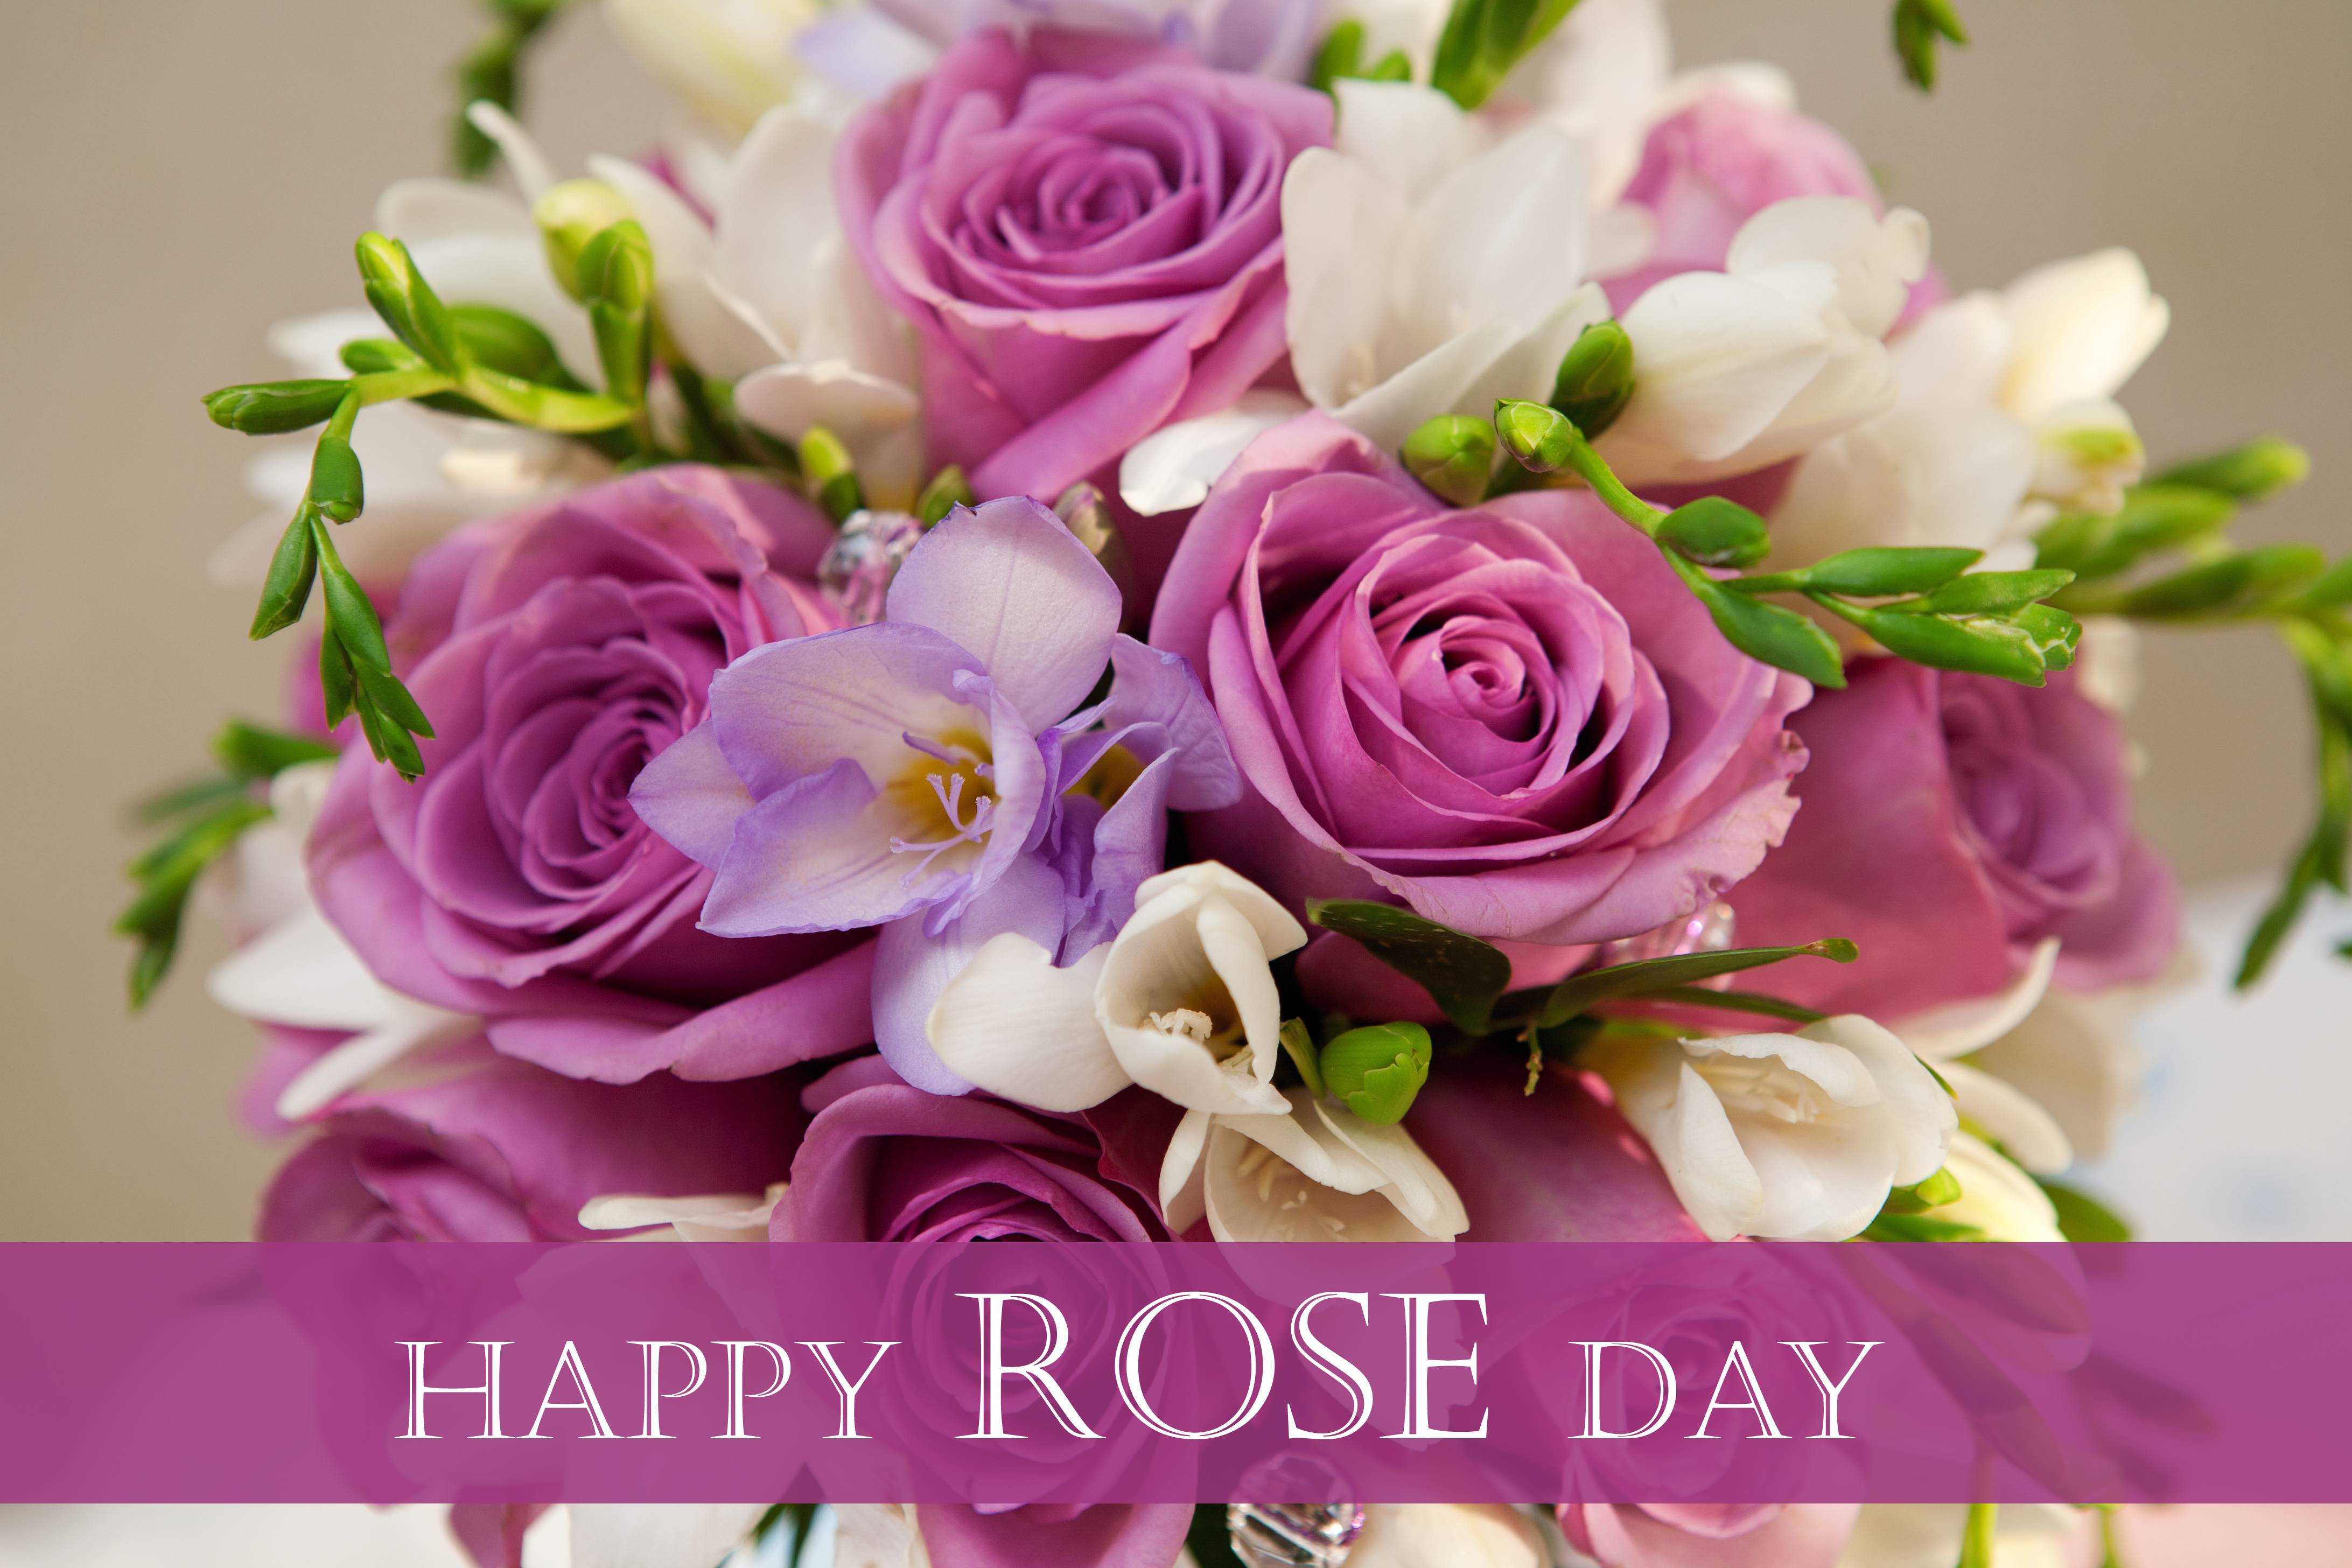 Rose Day Wallpaper and Beautiful Image 2020